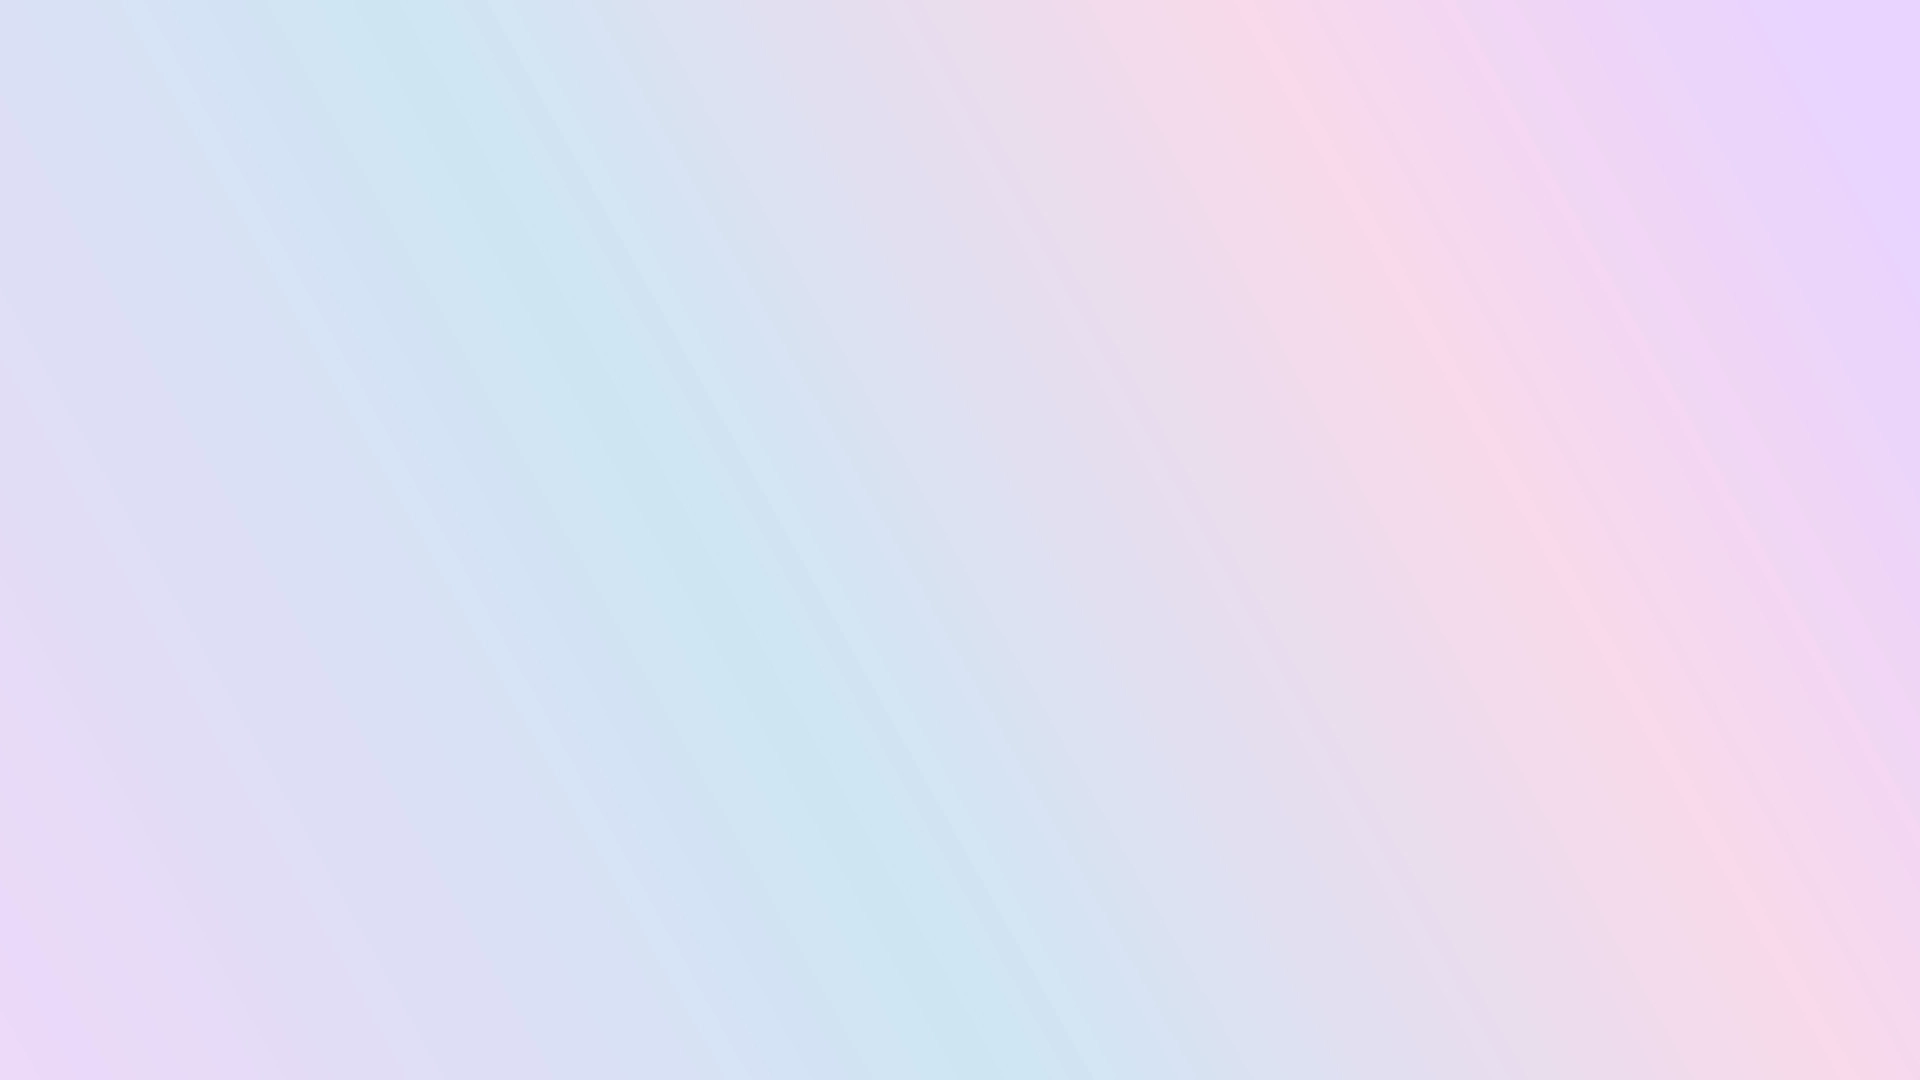 aesthetic pastel gradient purple, blue and pink gradient wallpaper illustration, perfect for backdrop, wallpaper, background, banner